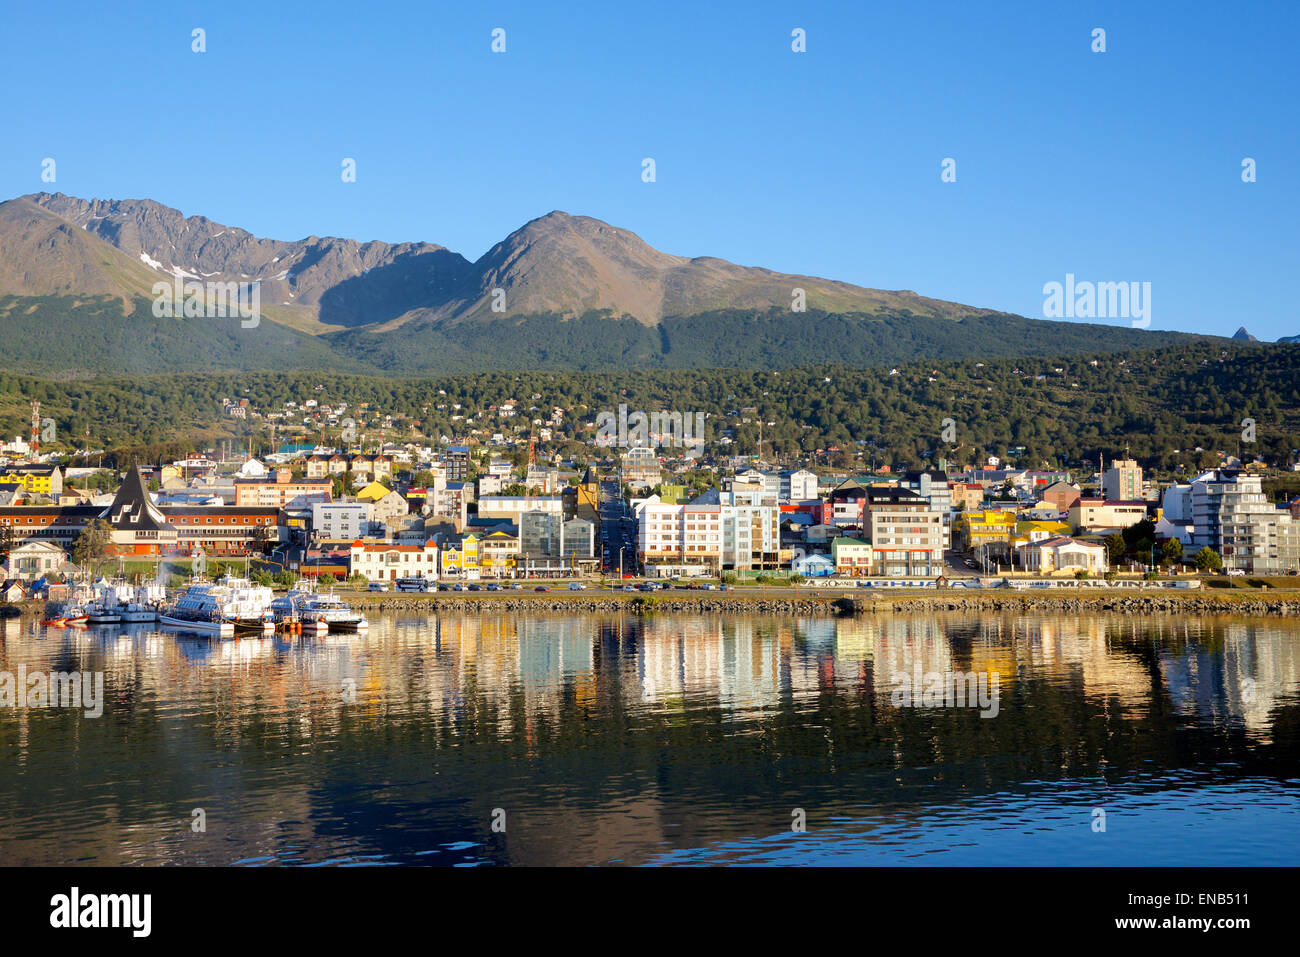 Ushuaia waterfront most southern city on earth Tierra del Fuego Argentina Stock Photo